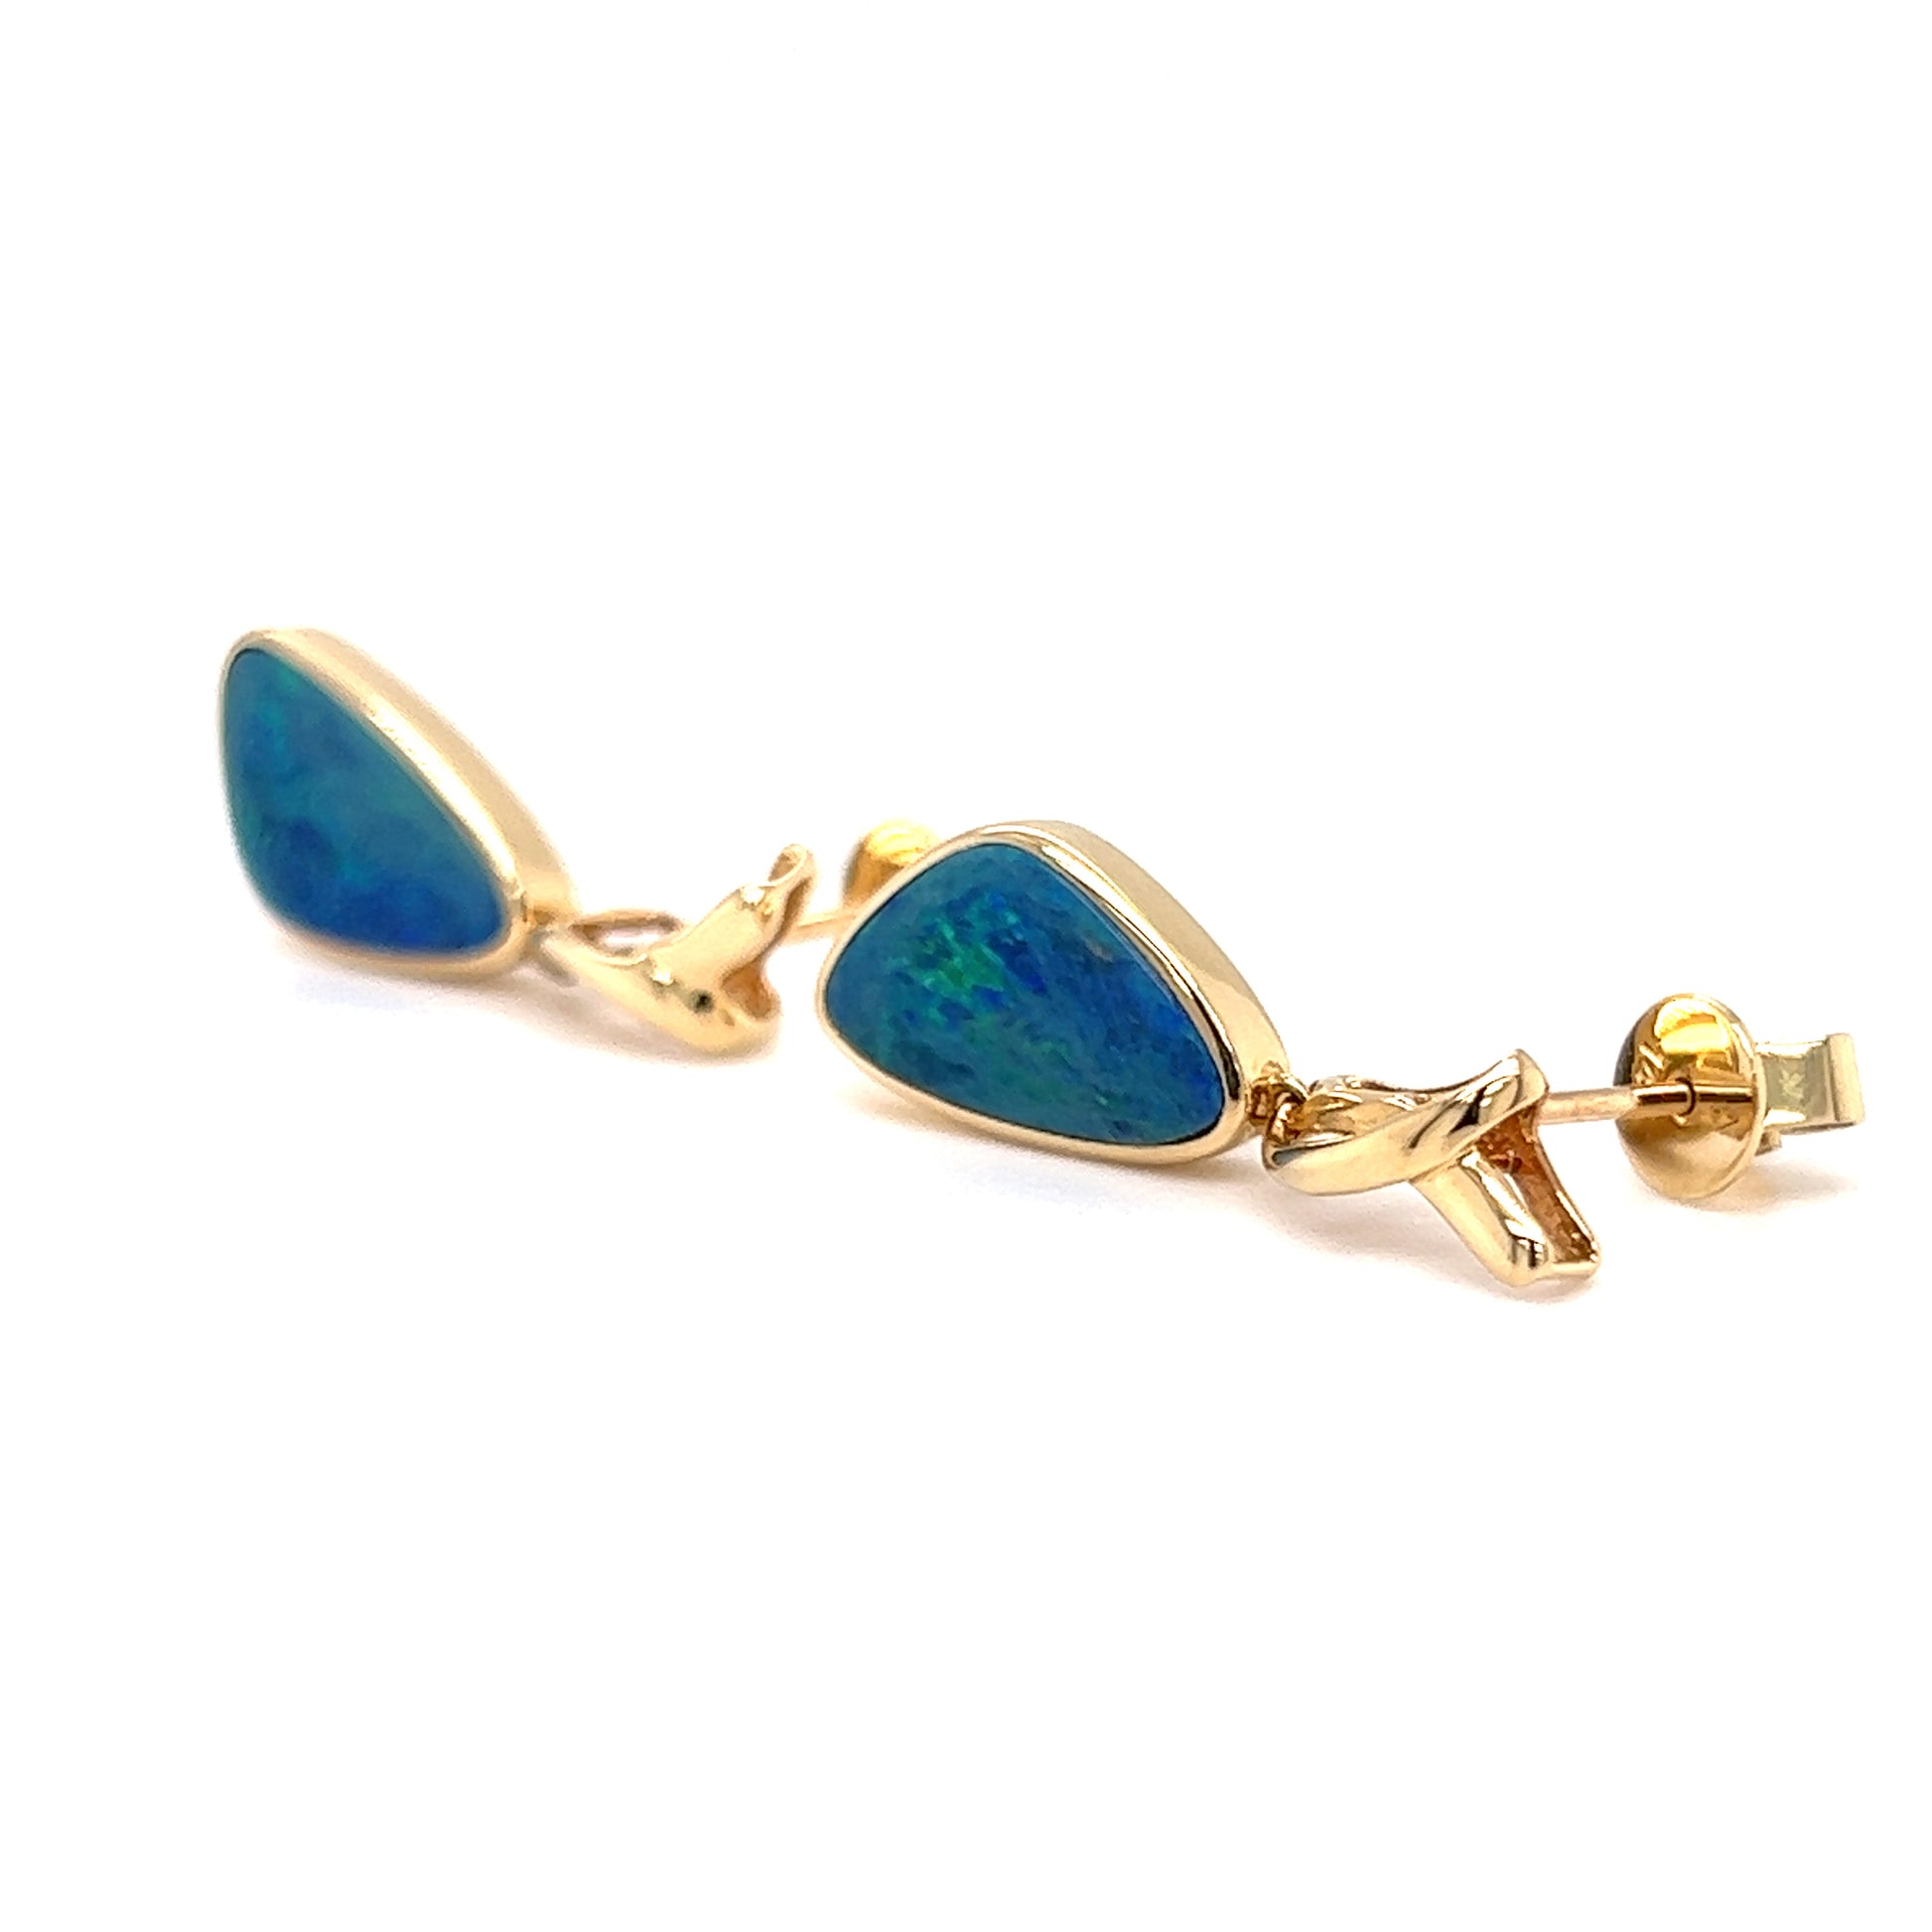 Black Opal Drop Earrings with 3.28ctw of Opal in 14K Yellow Gold Right Side View